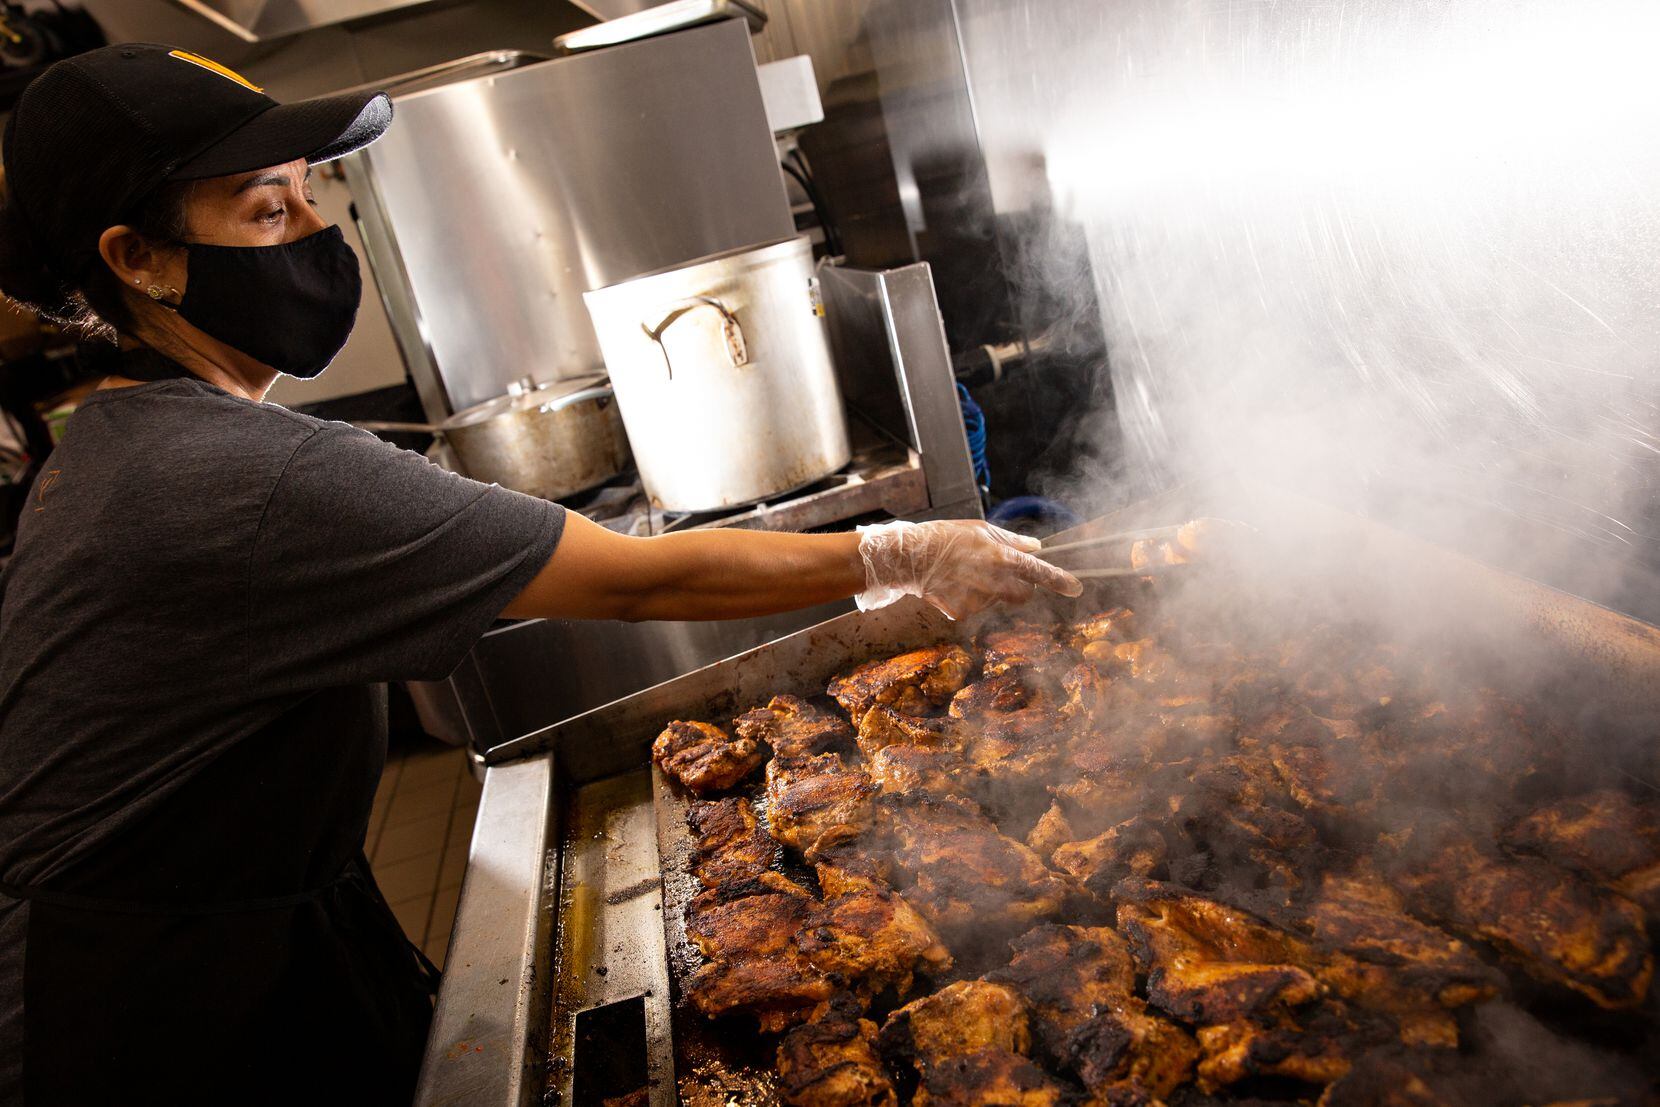 Maria Hernandez, a cook at Cava, grills chicken to be used in Mediterranean bowls, salads or...